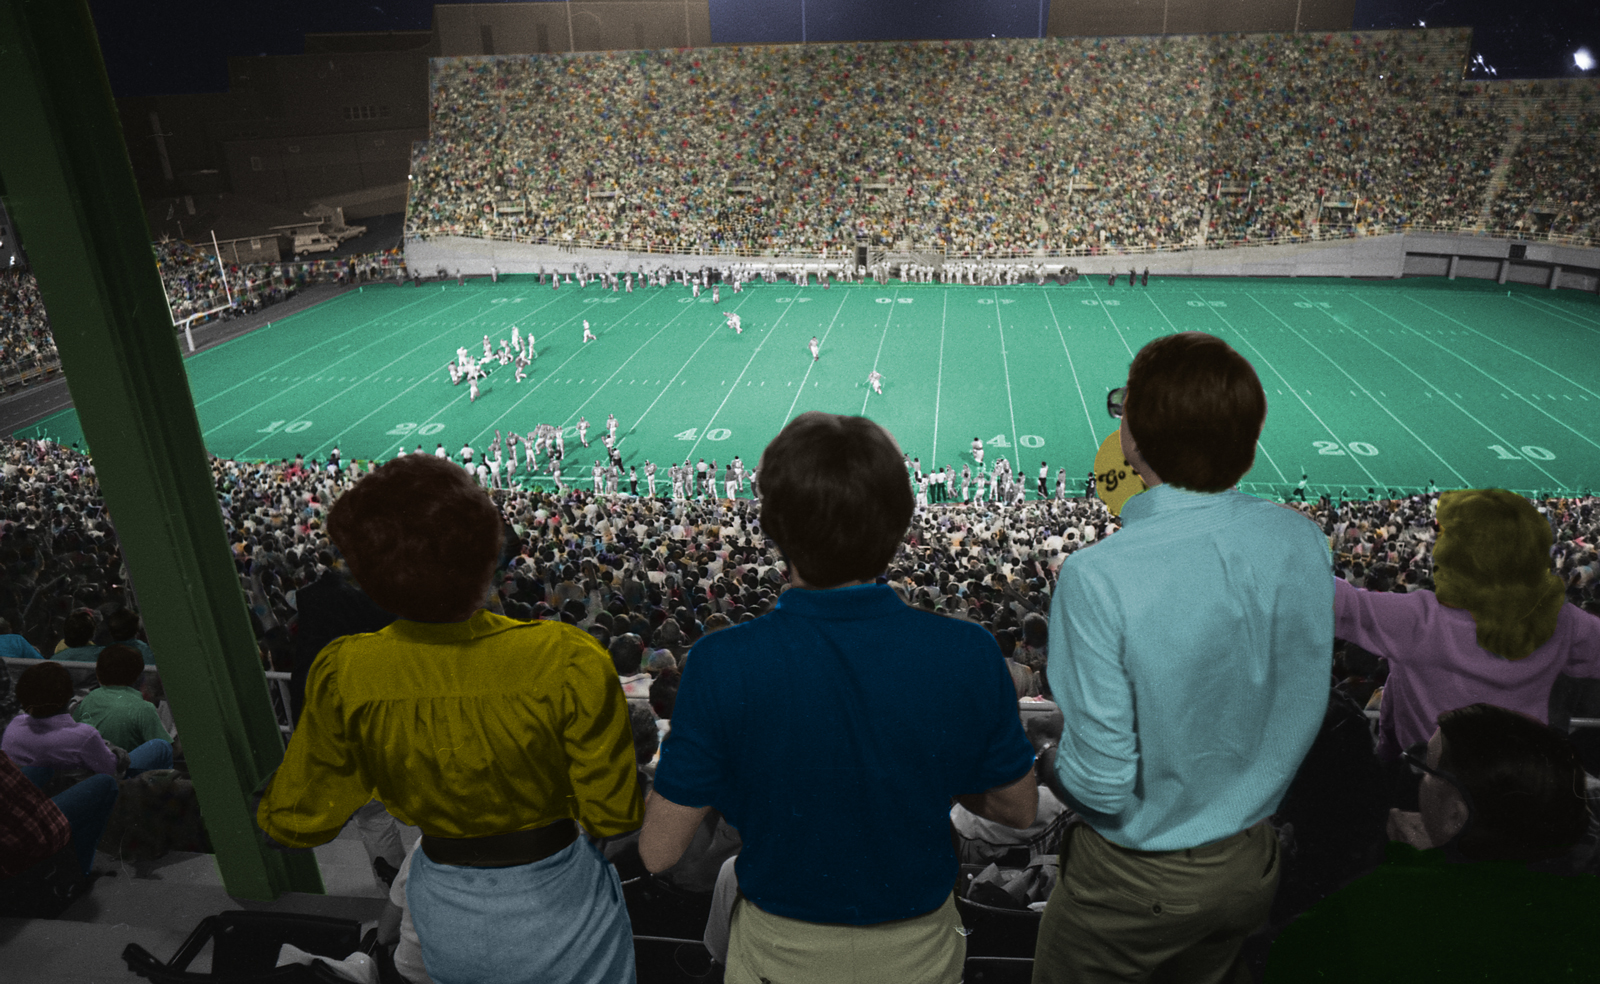 Where Commodores Come Together: As Dudley Field awaits new upgrades, past renovations served to gather the Vanderbilt community